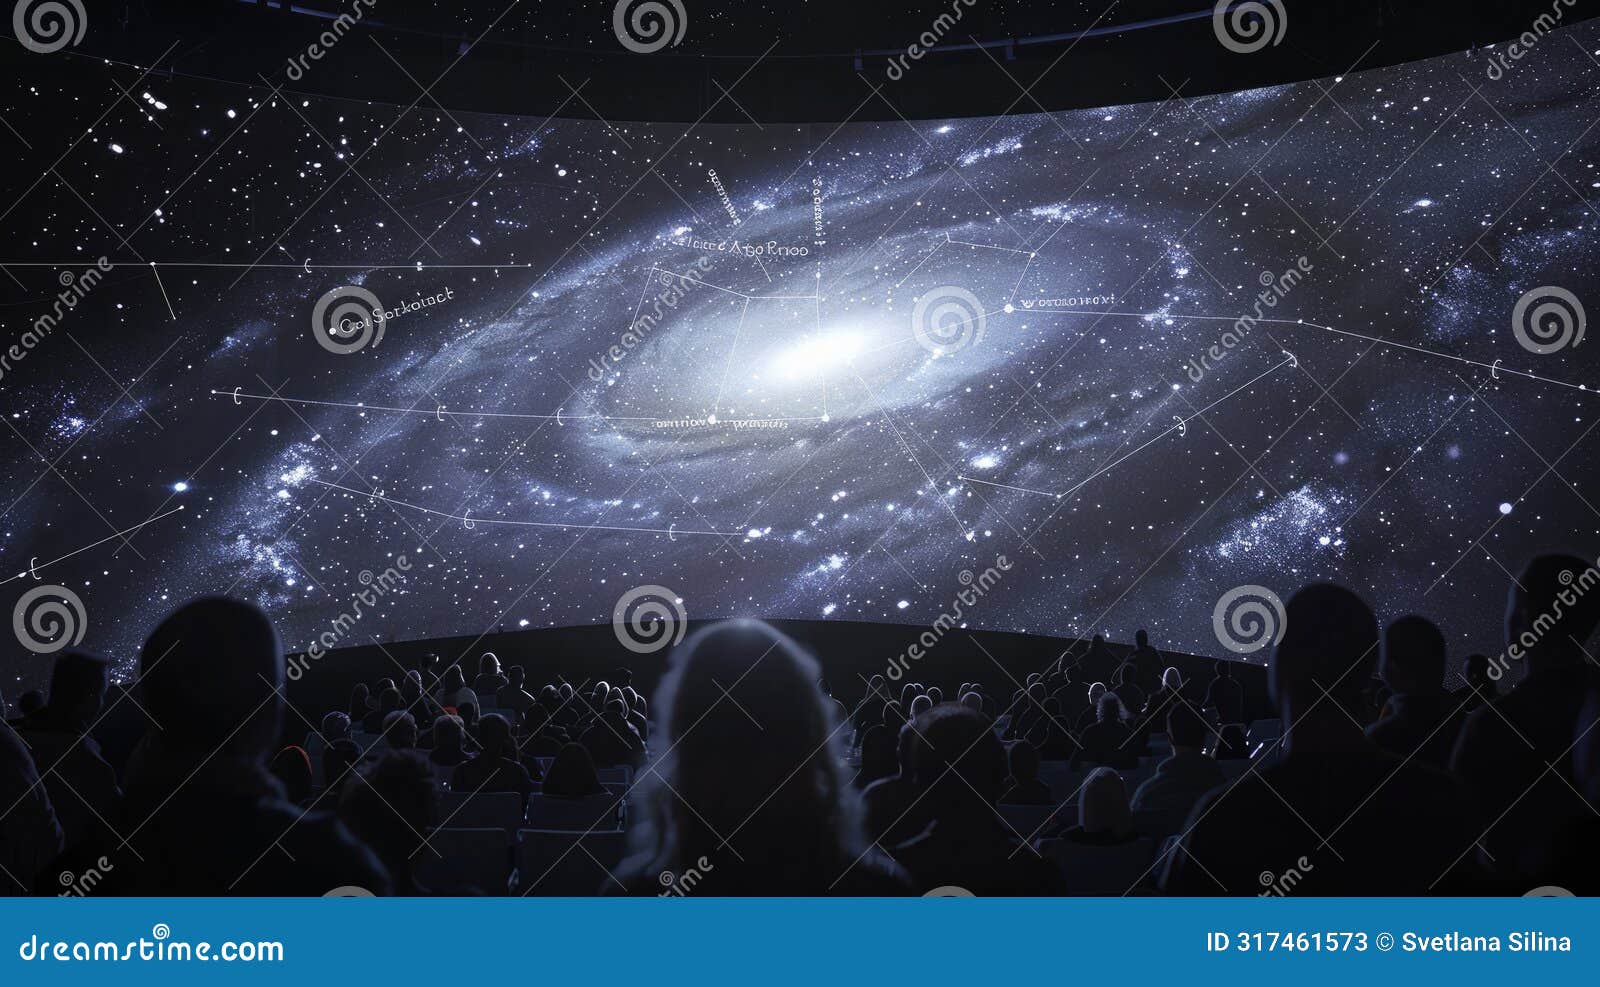 galaxy formations visualized in a planetarium, annotated with distances, surrounded by an audience. big data